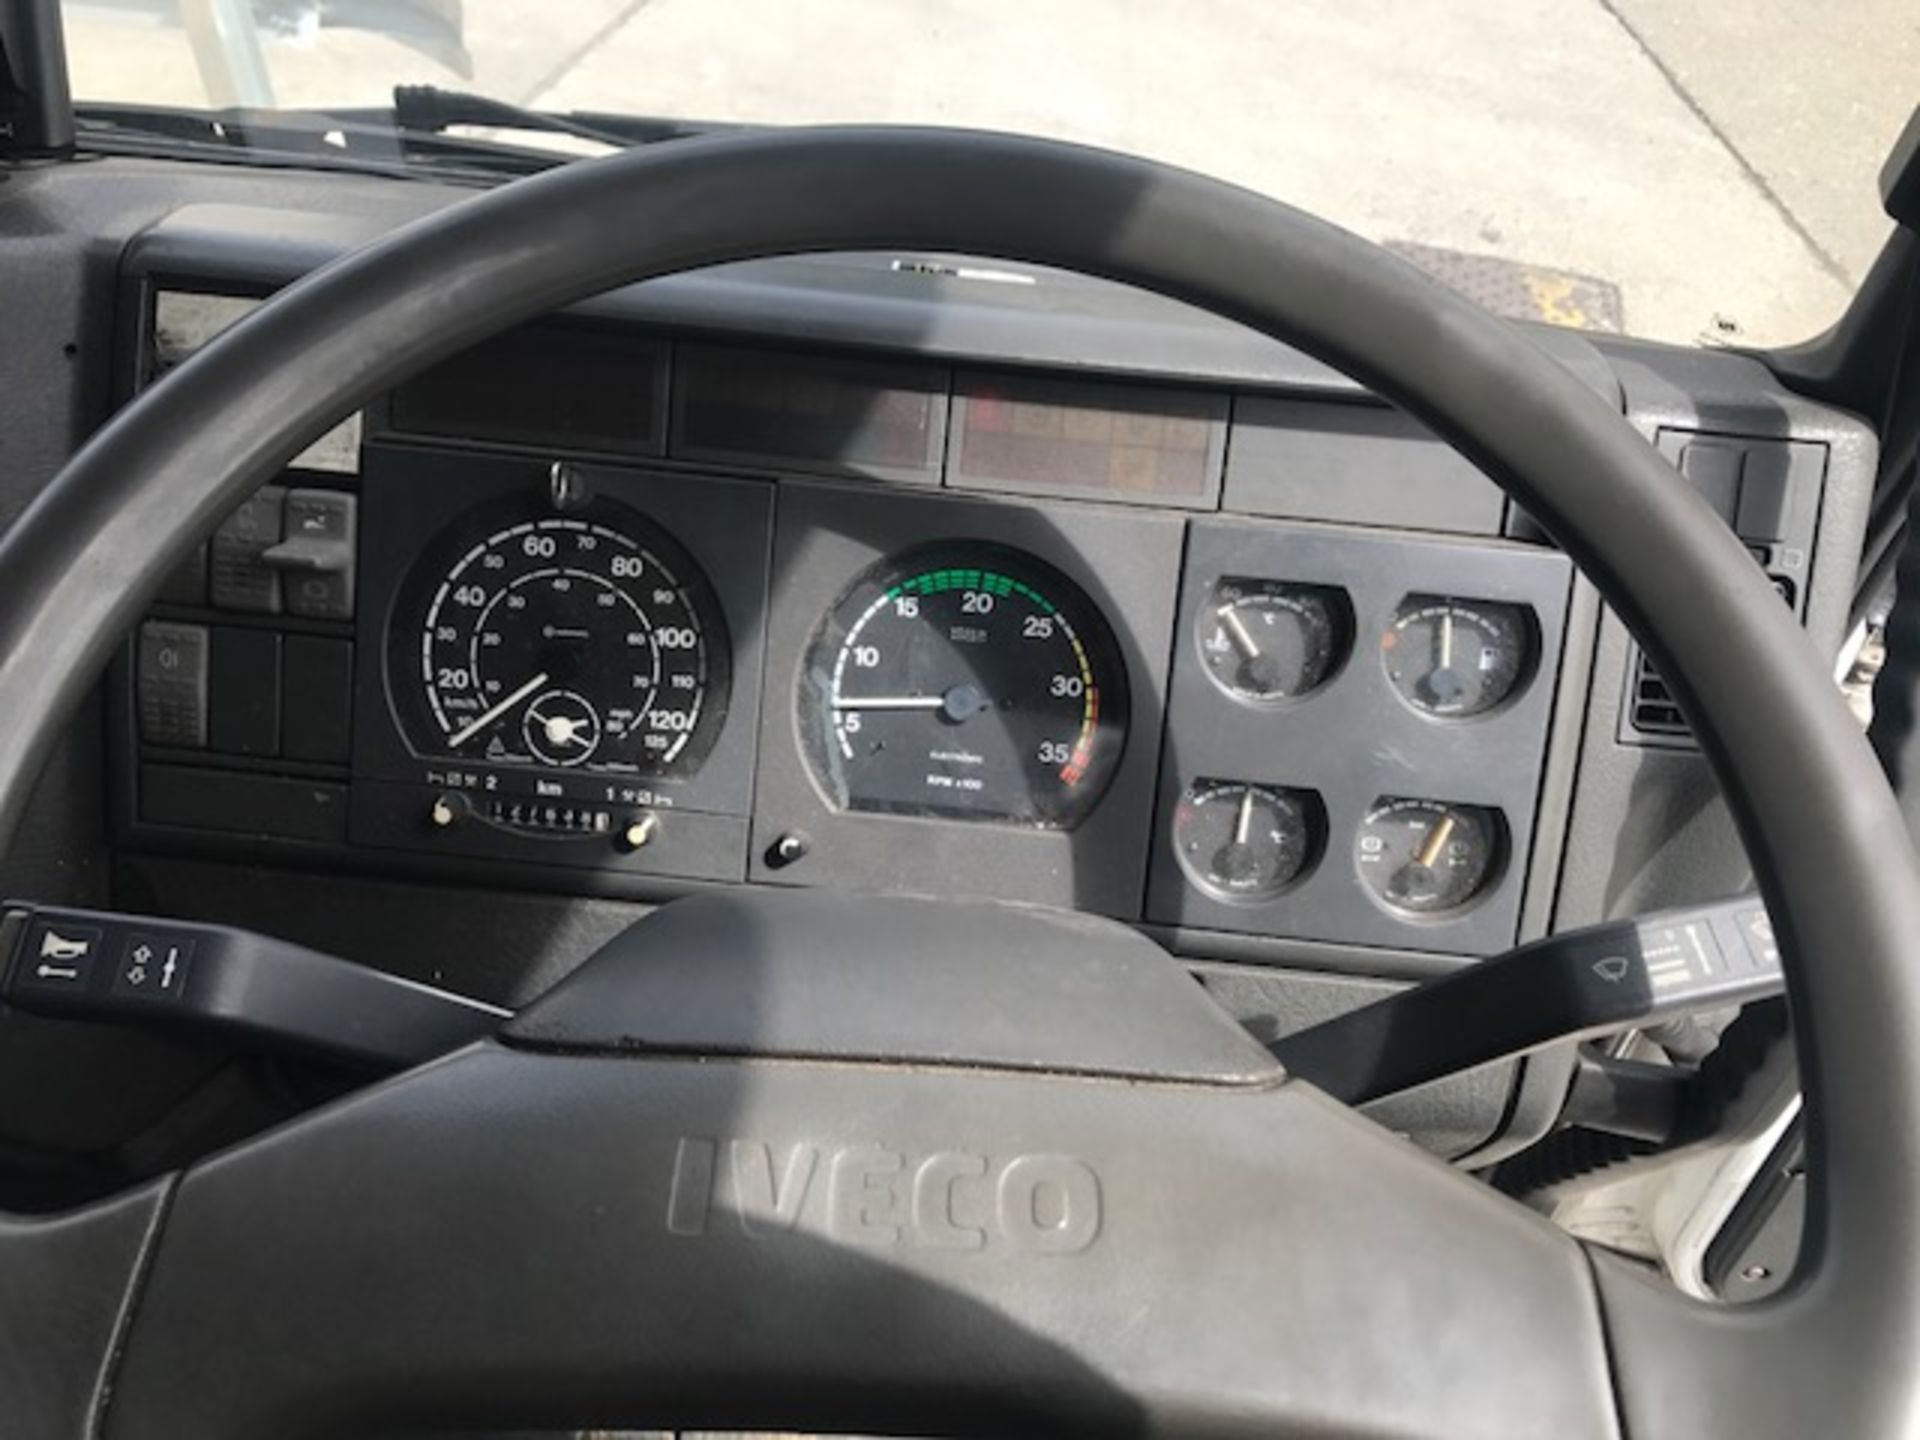 2003 Iveco Ford Tector ML100 E21D10T crew cab breakdown recovery vehicle complete with Garmin - Image 10 of 14